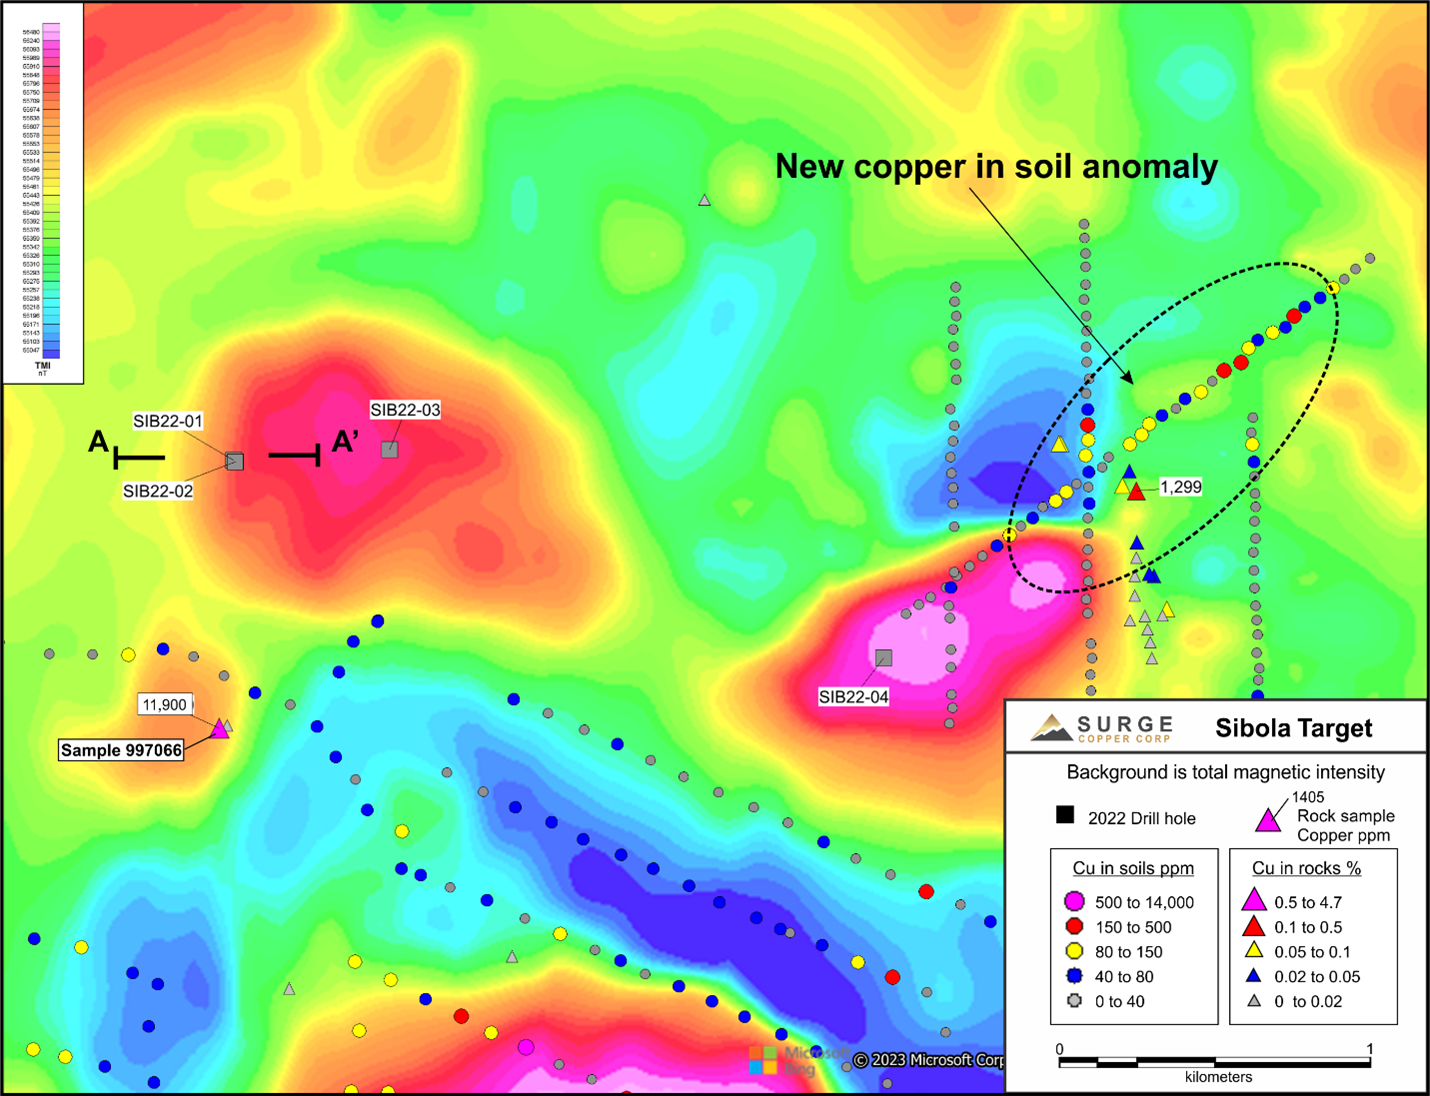 Sibola Target Map on total magnetic intensity showing copper-in-soils and copper-in-rocks and 2022 drill hole locations.